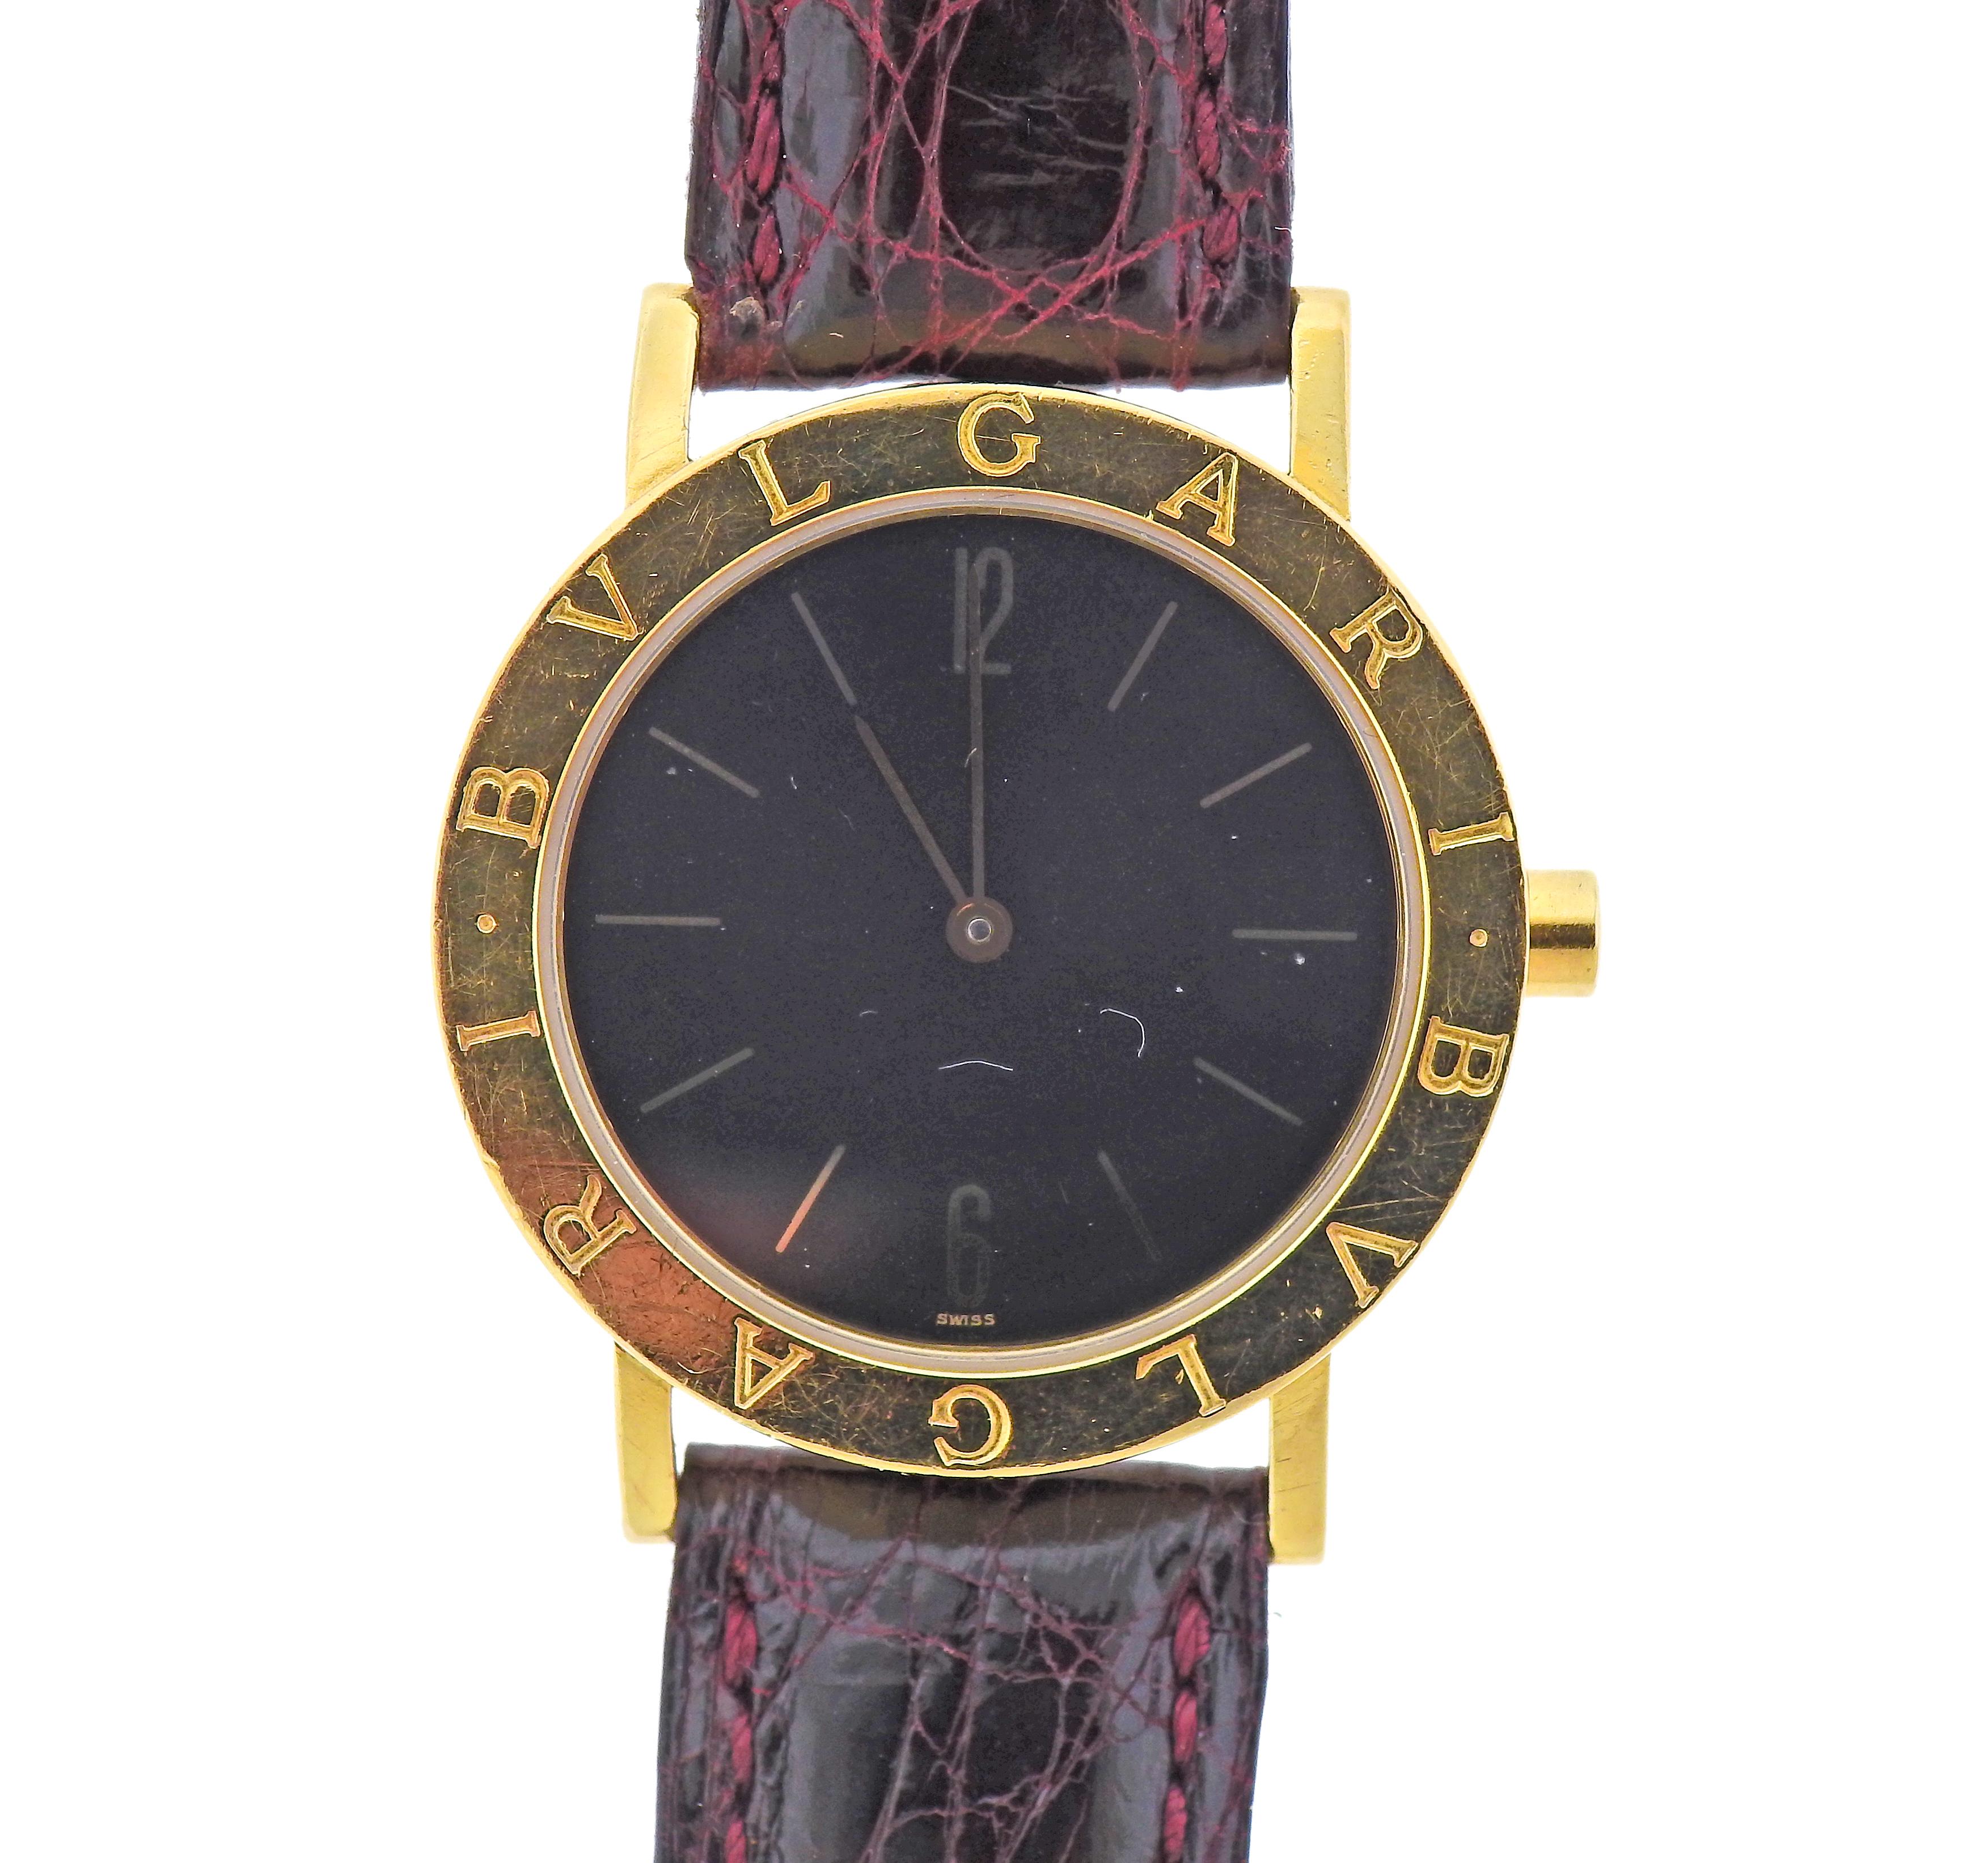 Classic 18k yellow gold Blvgari watch, with black dial, featuring gold stick markers. With leather band and  18k gold buckle. Case is 33mm in diameter, Bracelet is 6 7/8